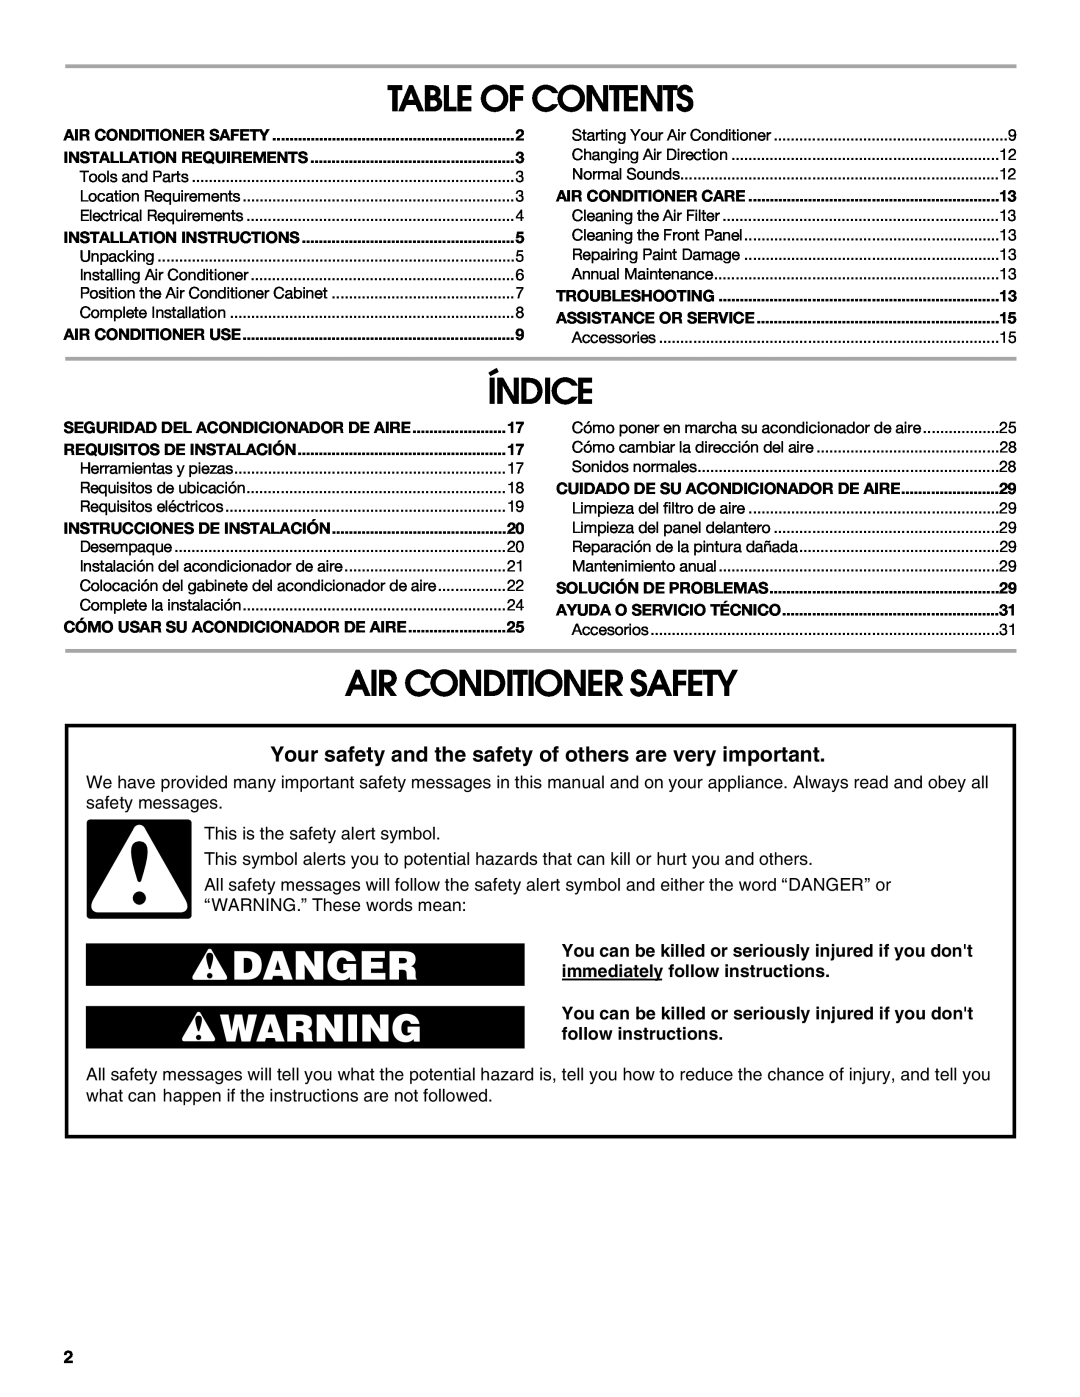 Whirlpool ACC082XR0 manual Table Of Contents, Índice, Air Conditioner Safety 